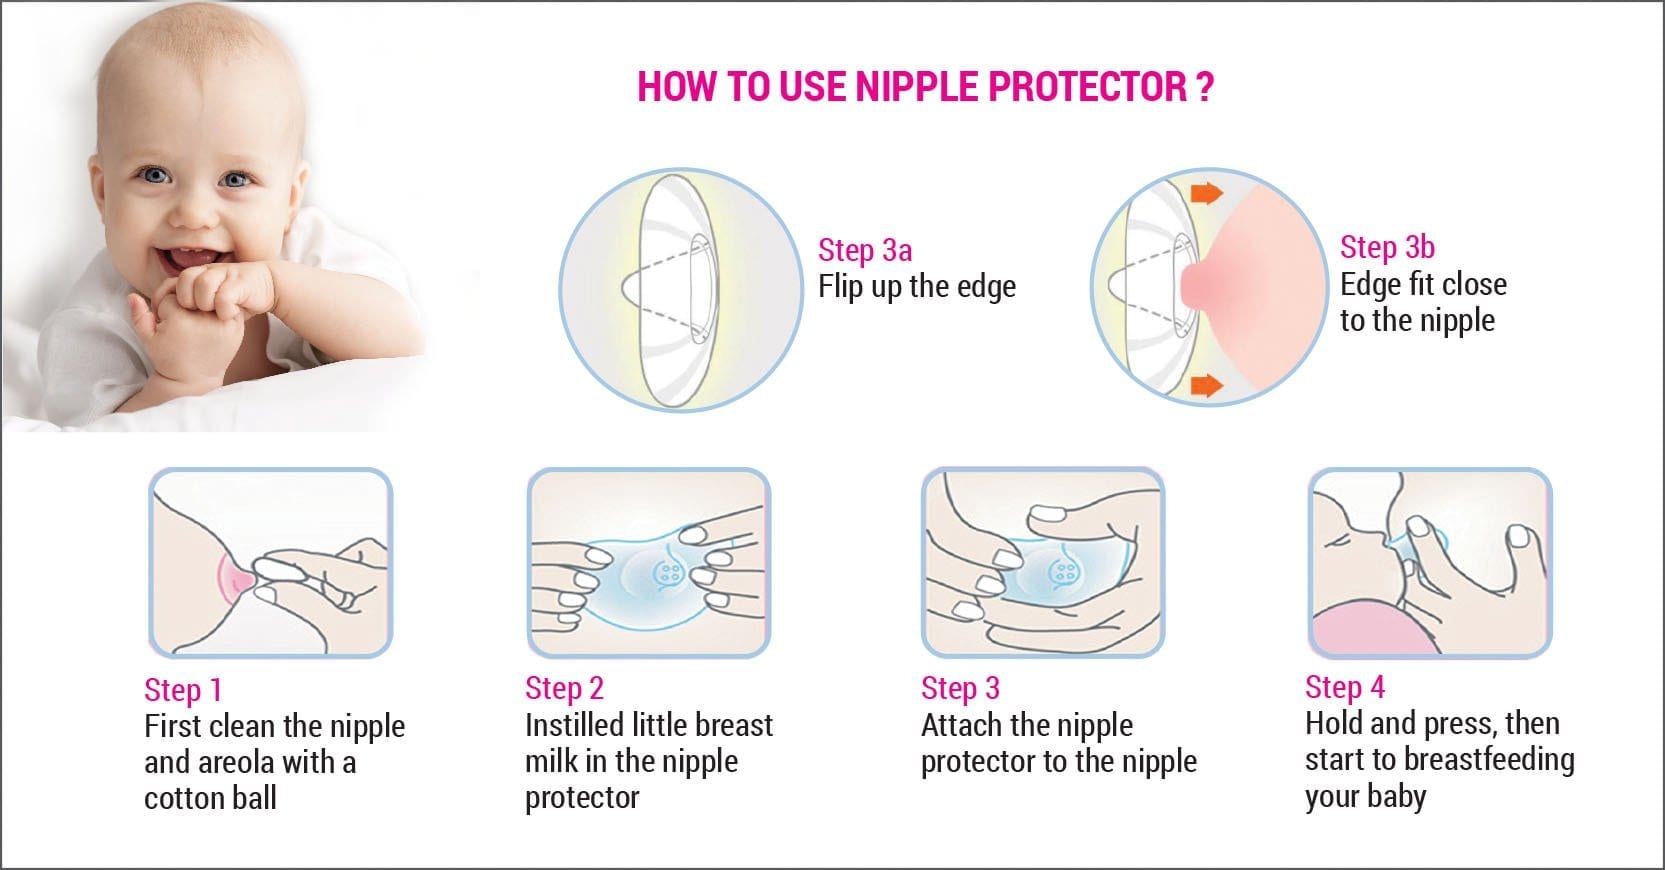 How to use nipple protector?